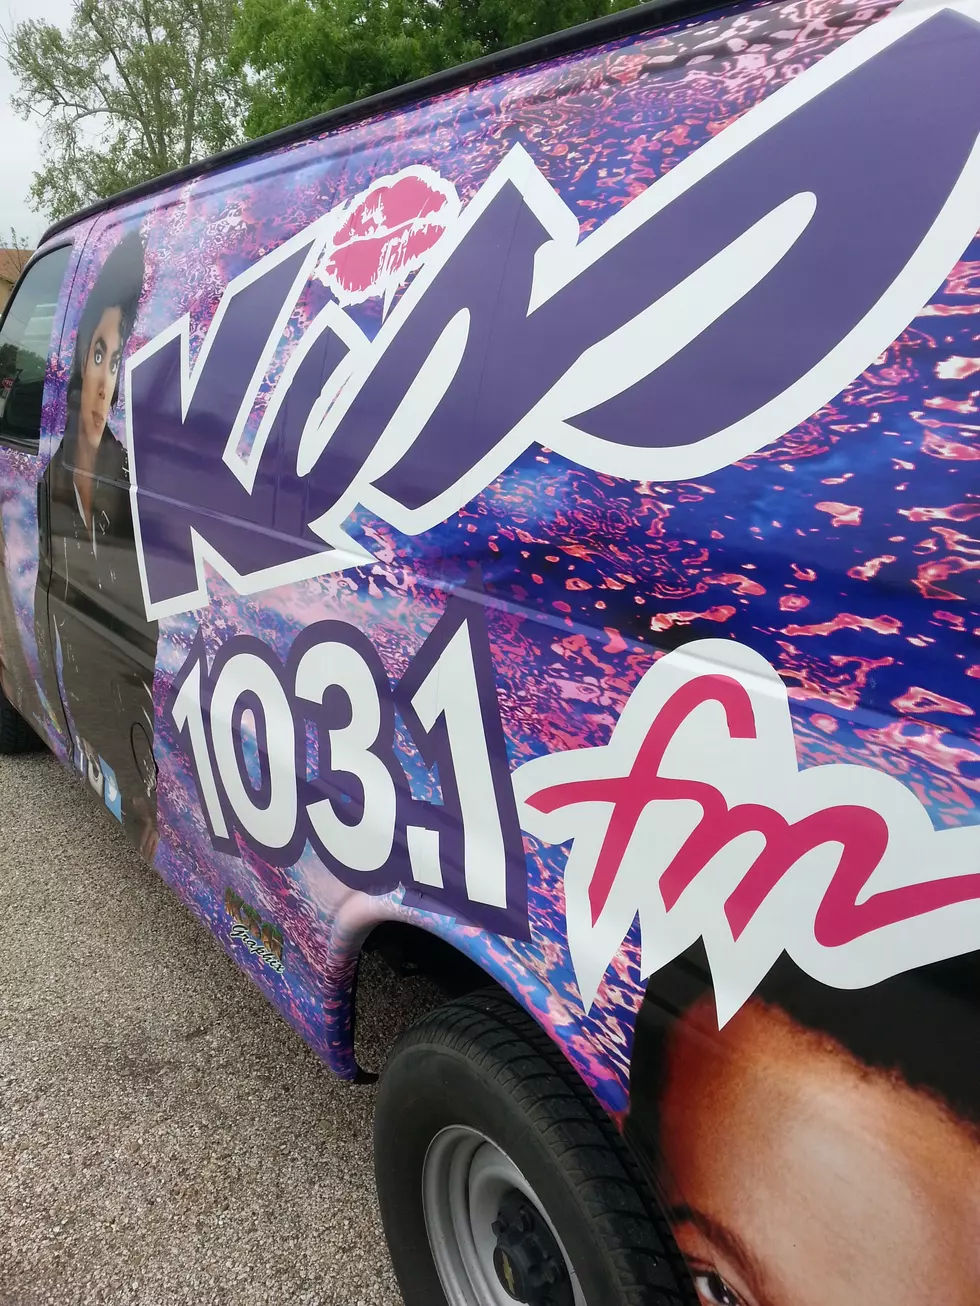 MyKiss 1031 Live At The Grand Opening Celebration Of L&#038;L Phat Do&#8217;s